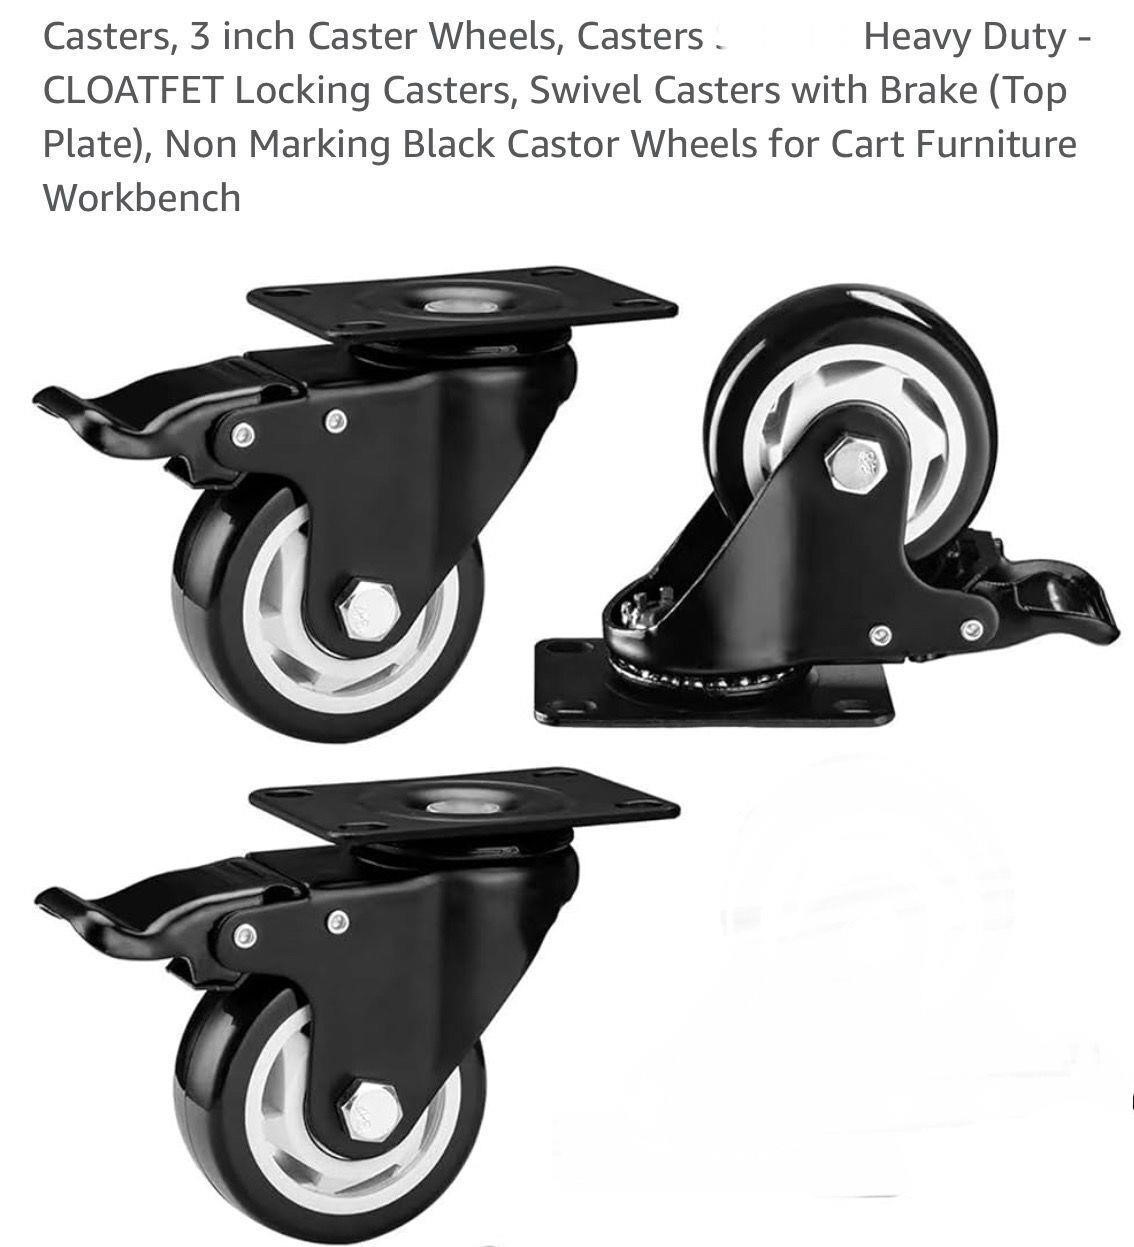 Casters, 3 inch Caster Wheels, Casters